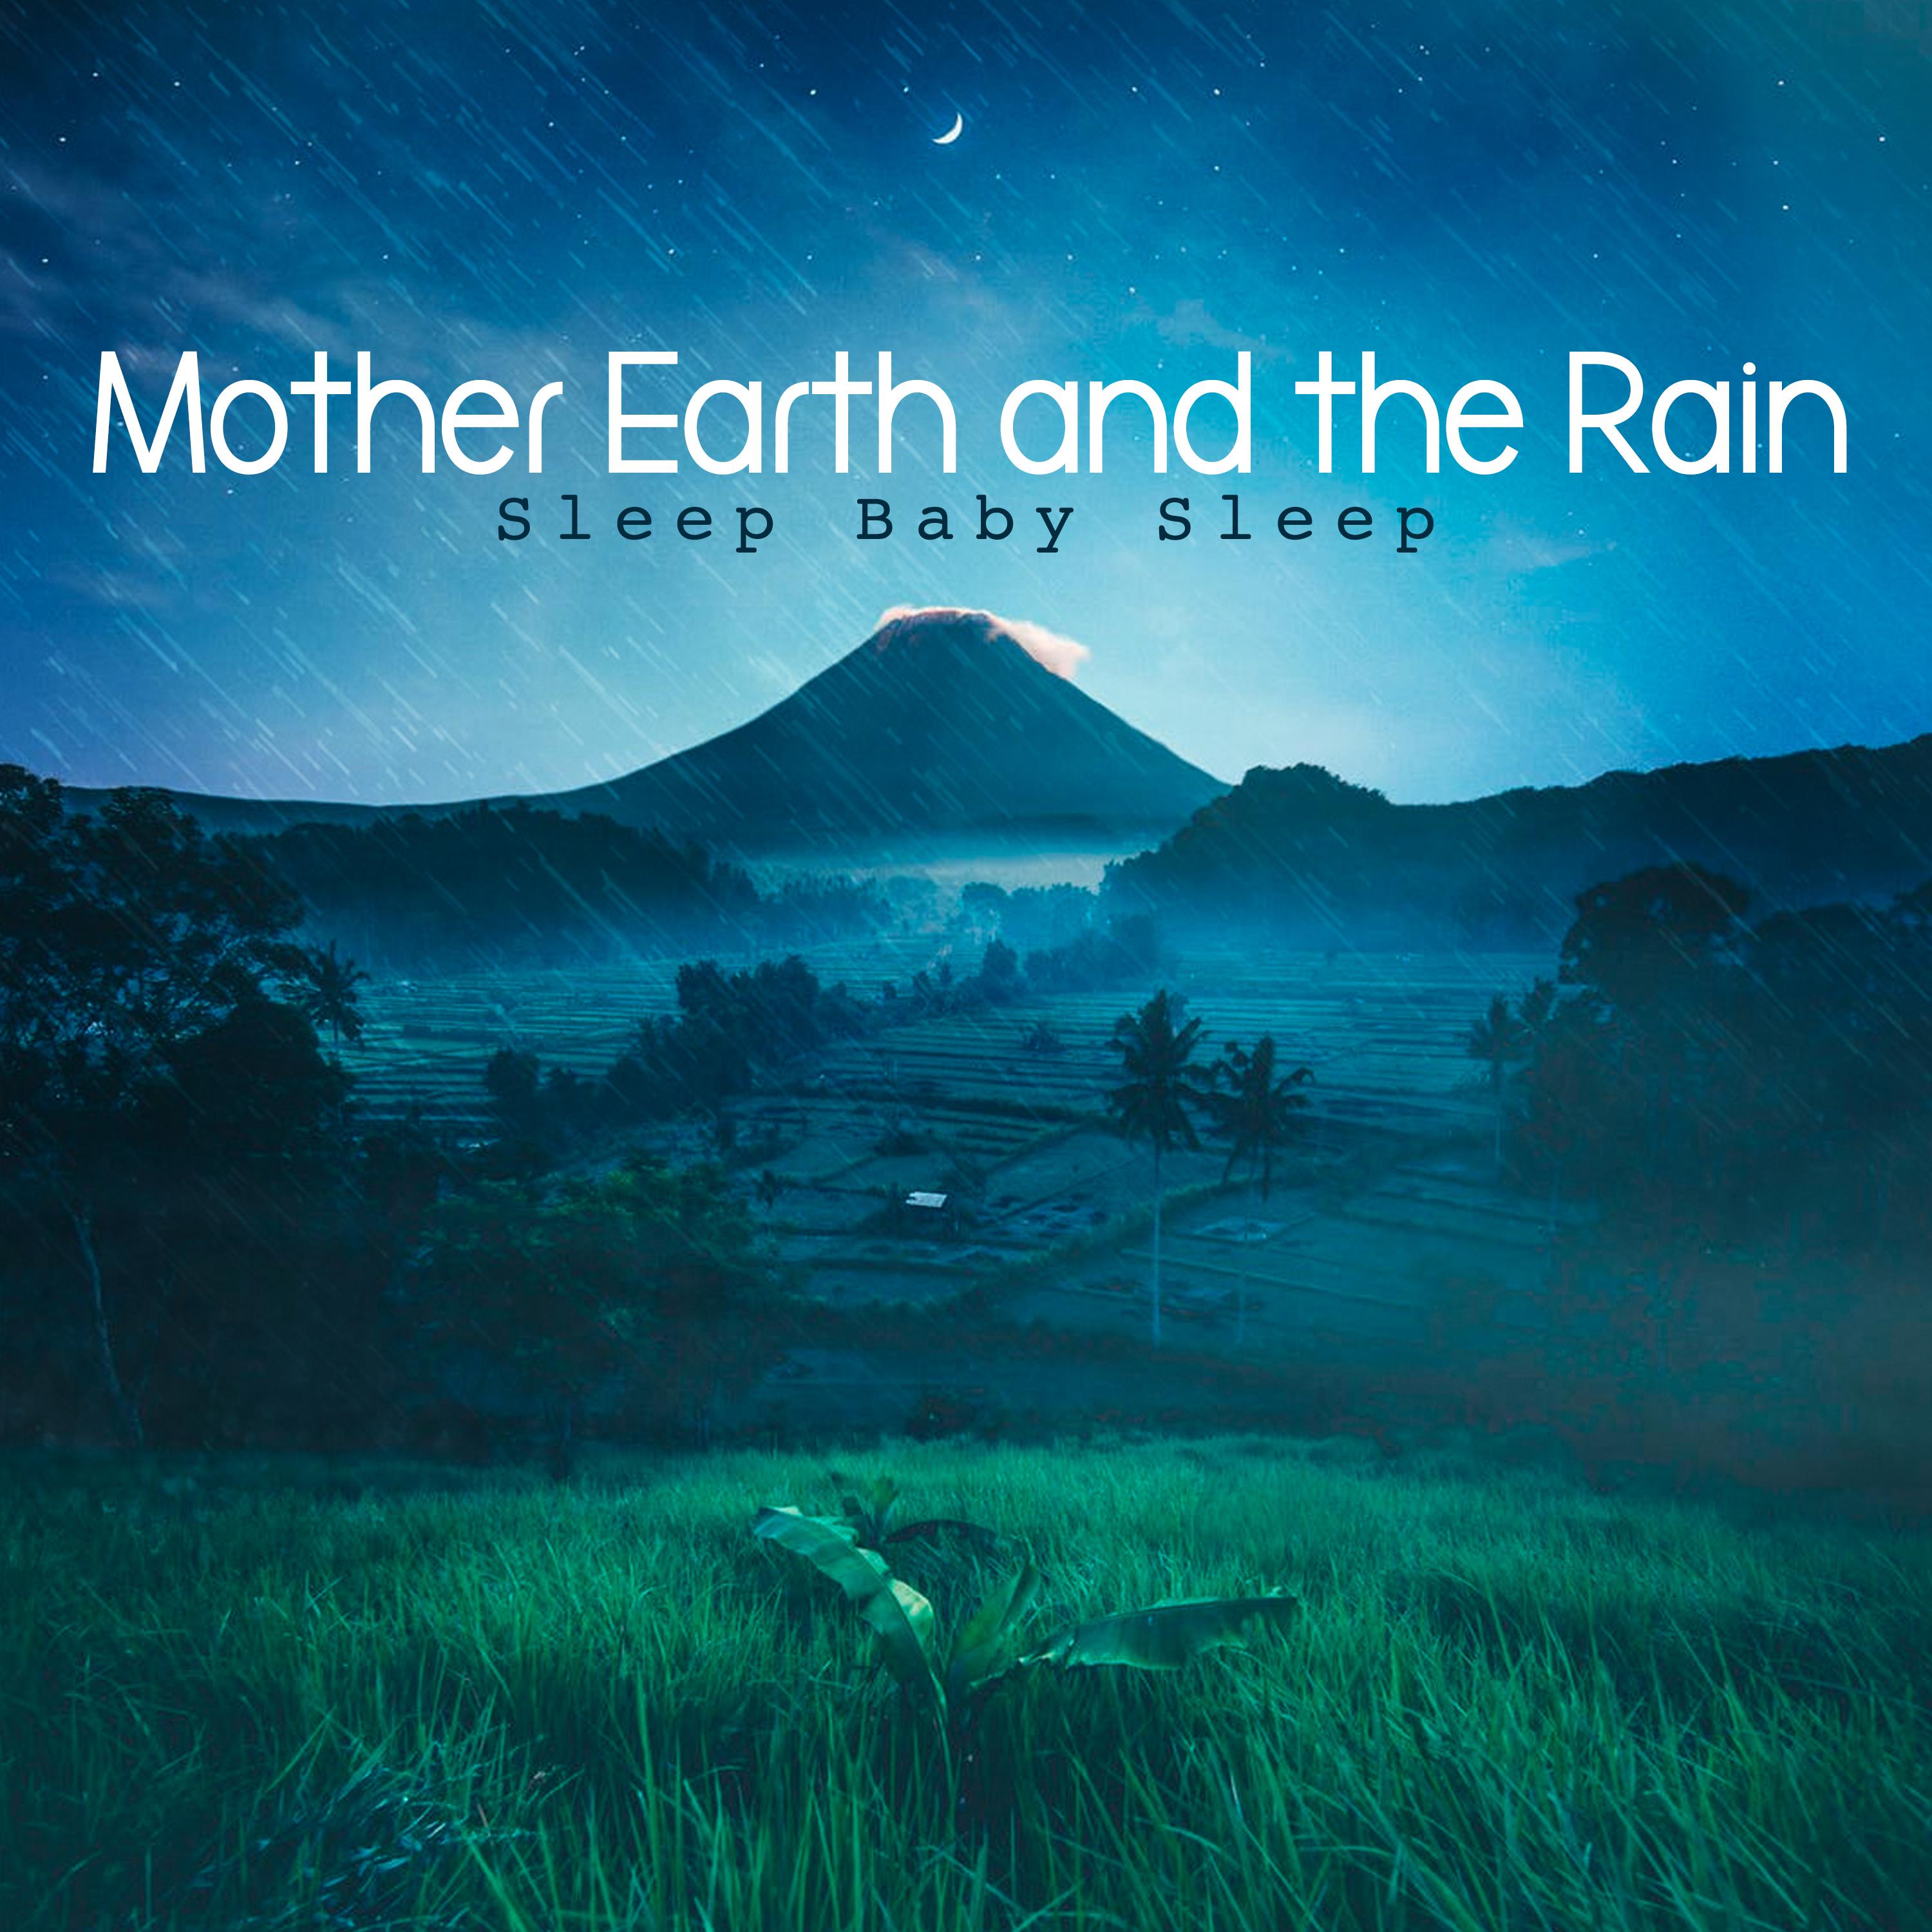 Mother Earth and the Rain